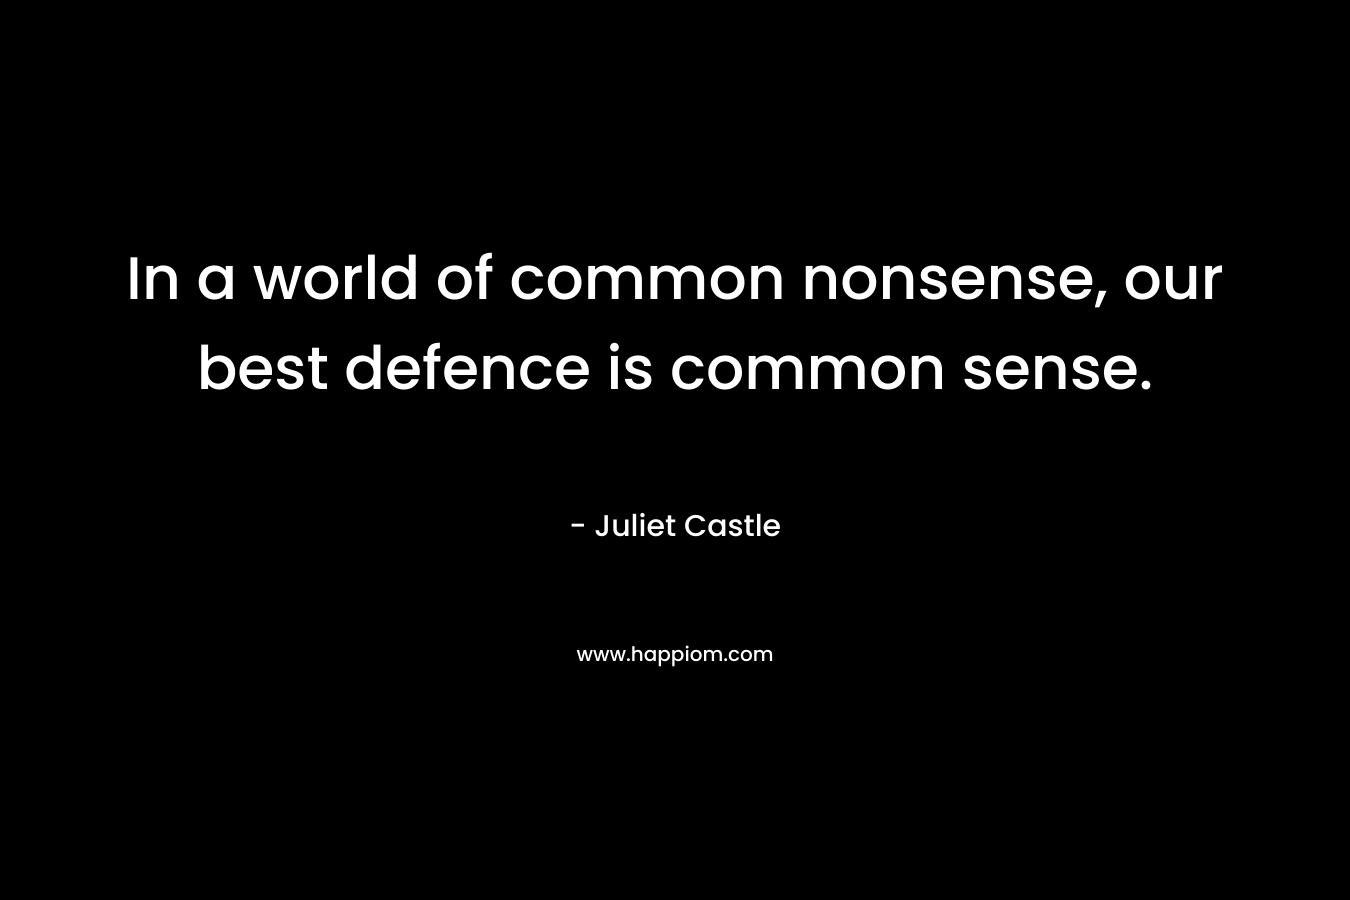 In a world of common nonsense, our best defence is common sense.